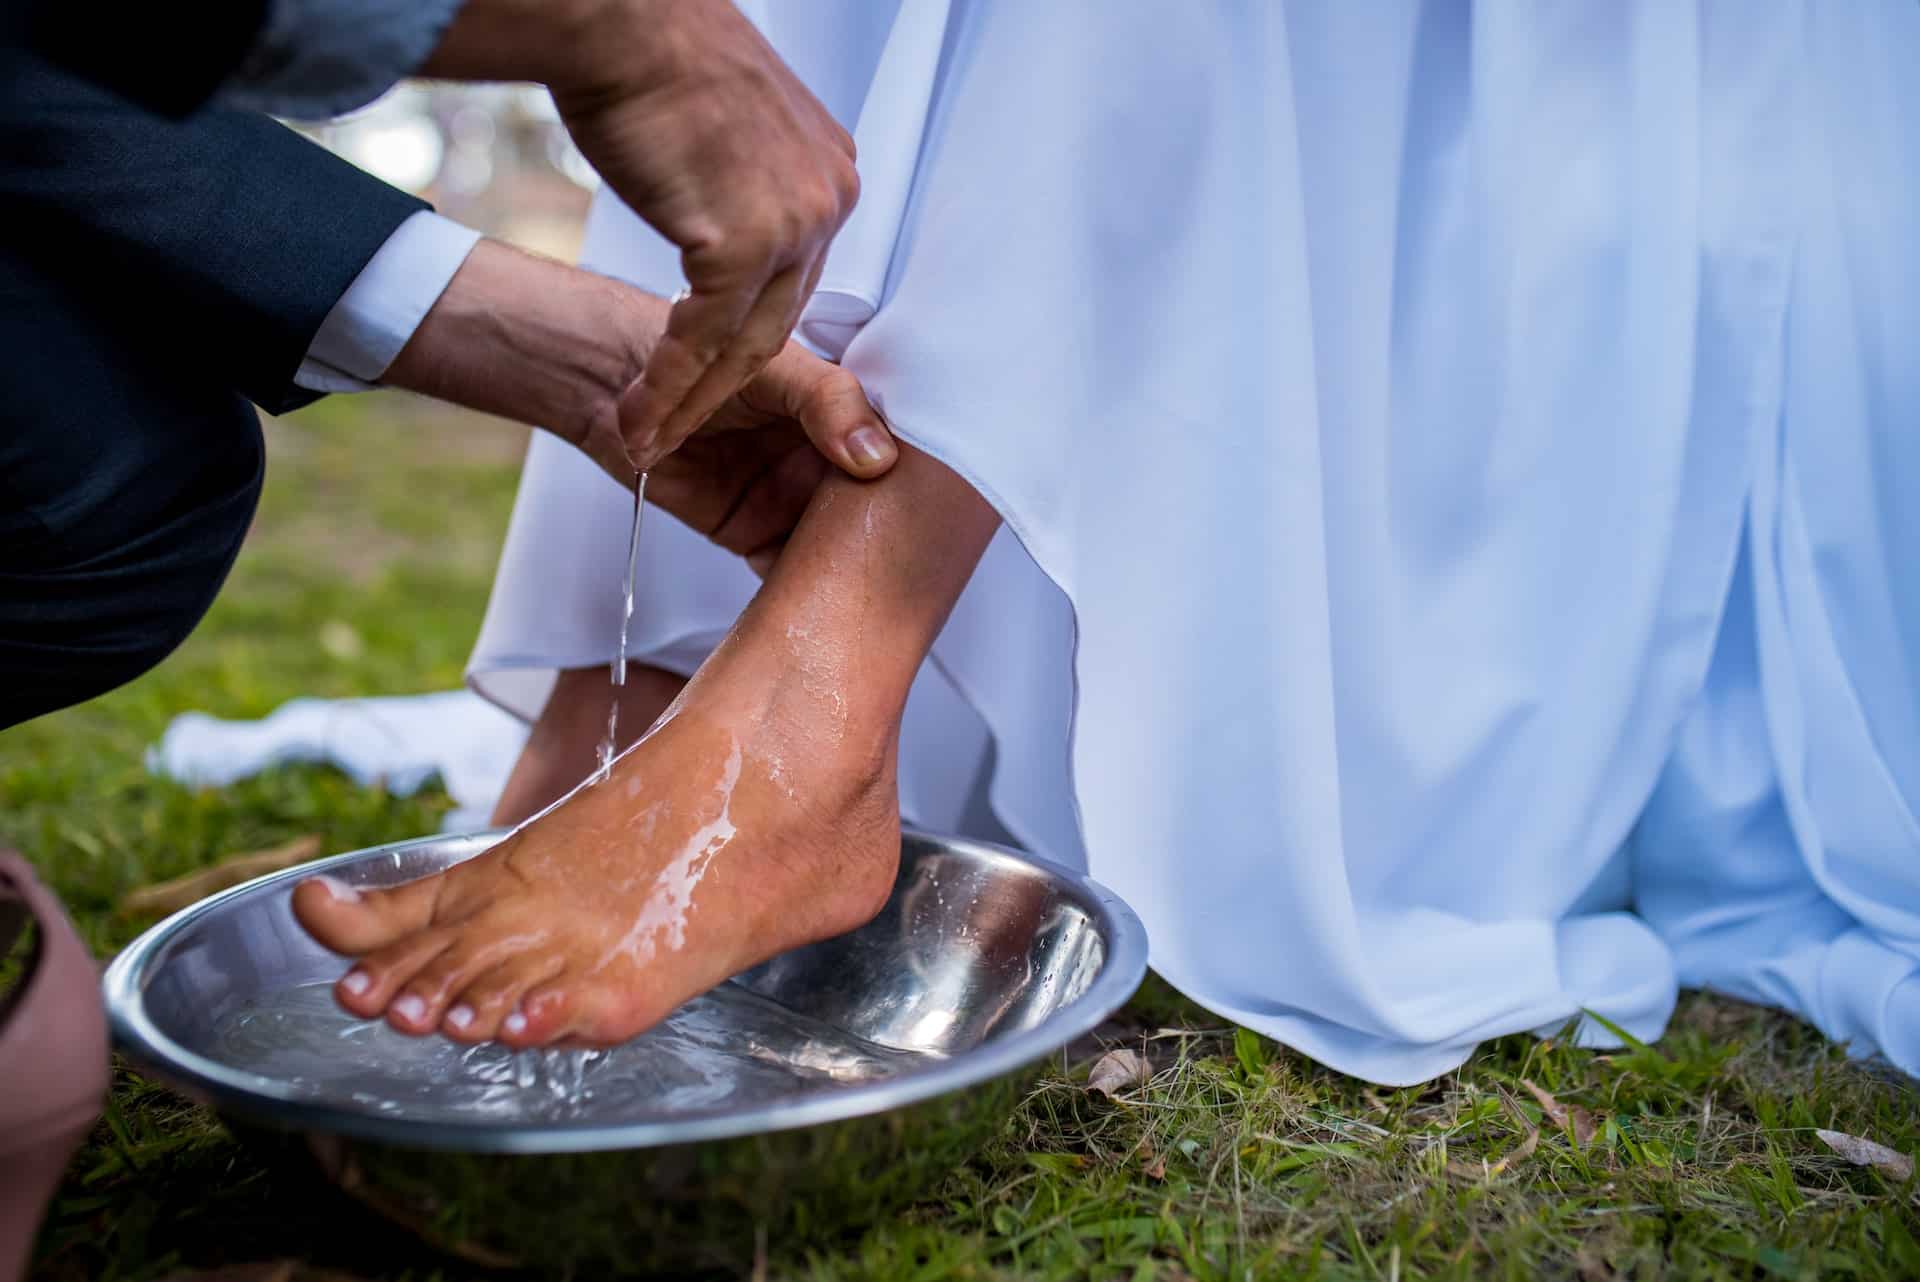 Is washing feet in the Bible a euphemism?